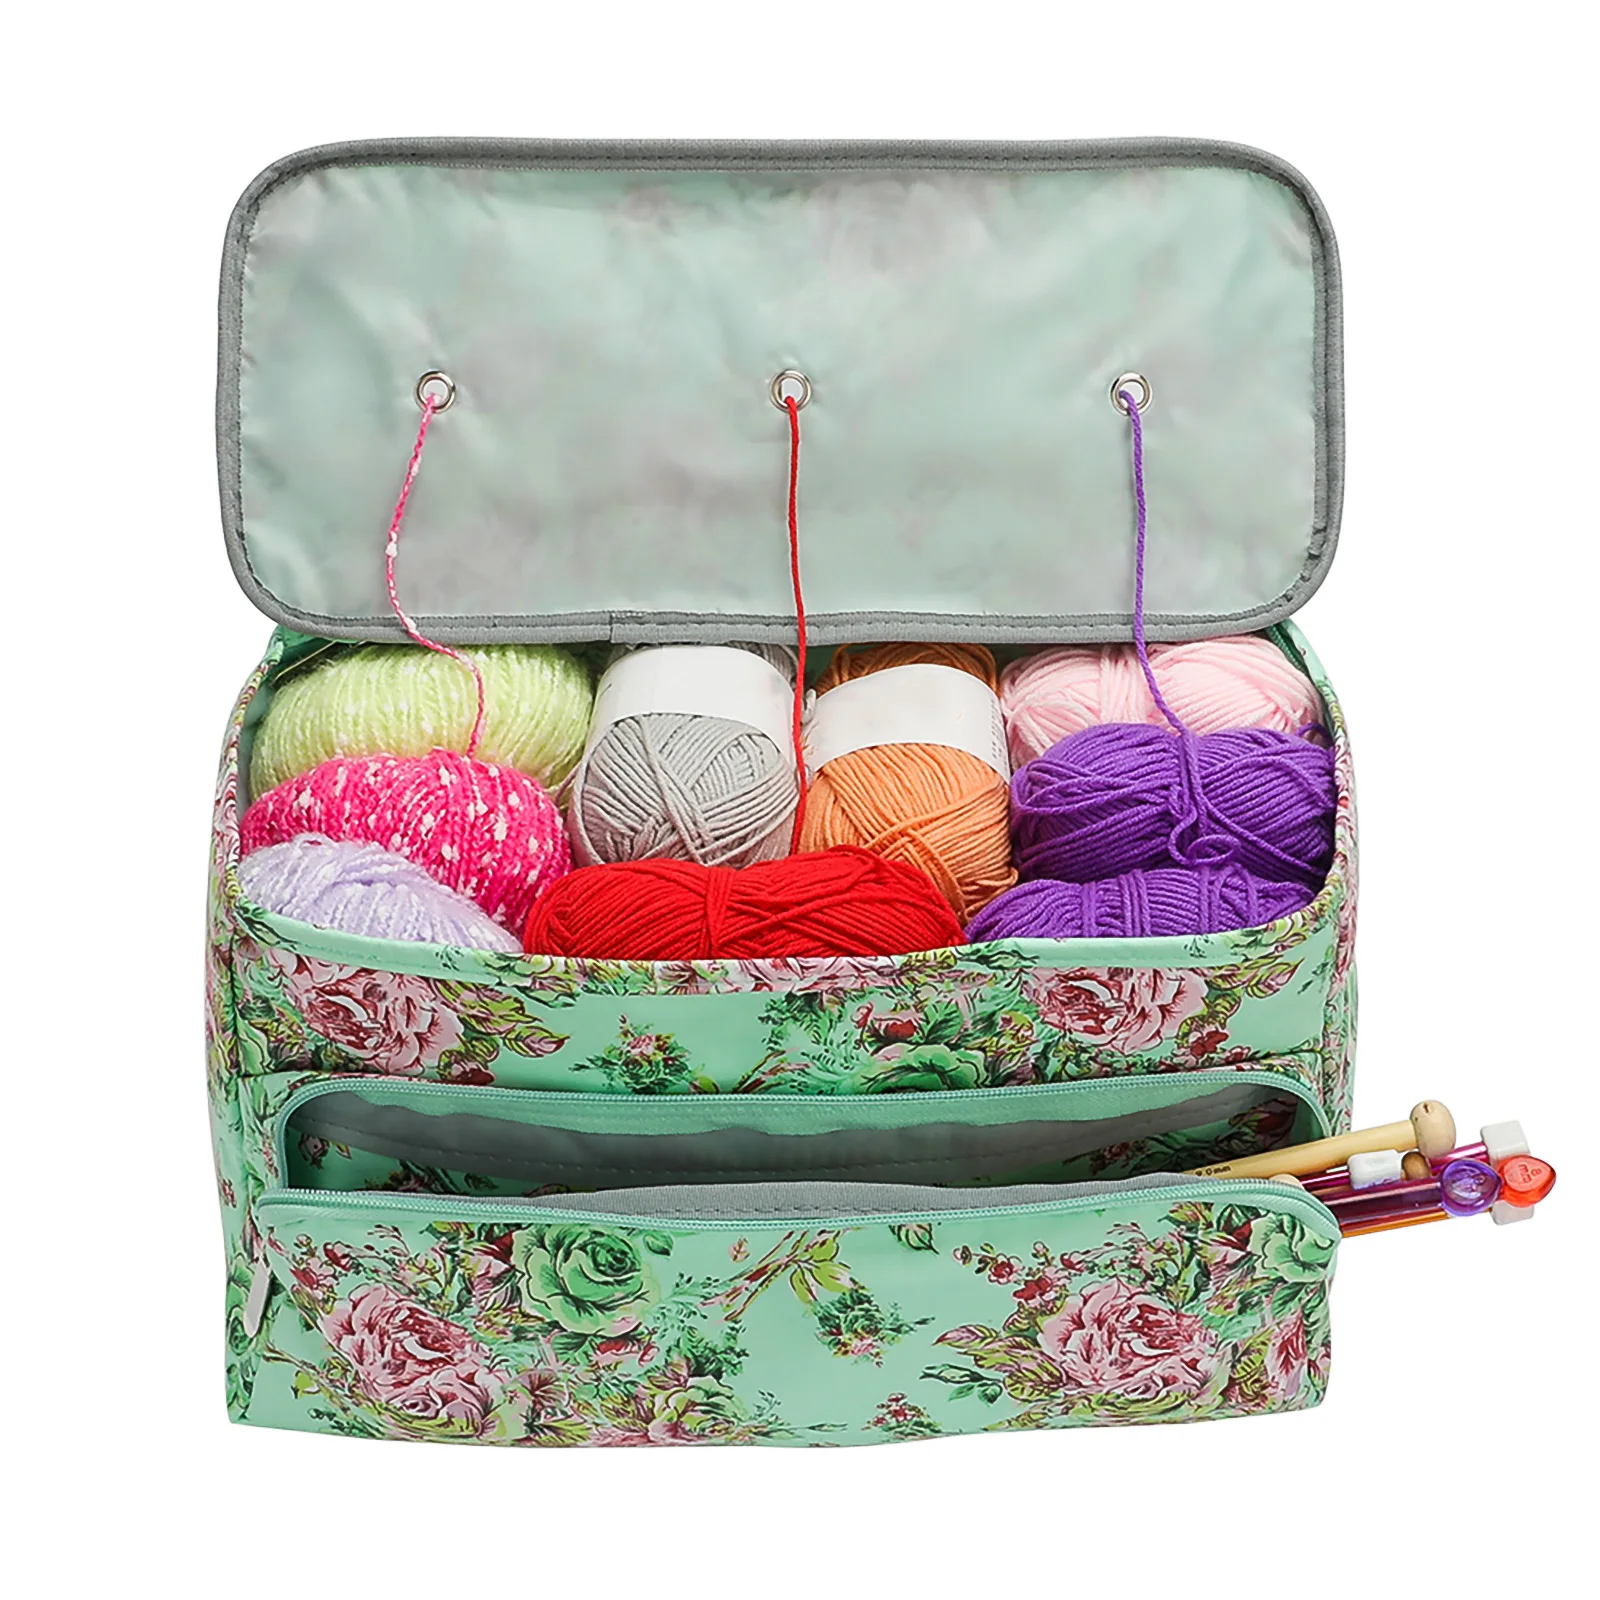 

Yarn Bags Crochet Totes Portable Crochet Yarn Storage Bag Organizer with Holes Knitting Bag Prevent Tangling Totes Sewing Tools